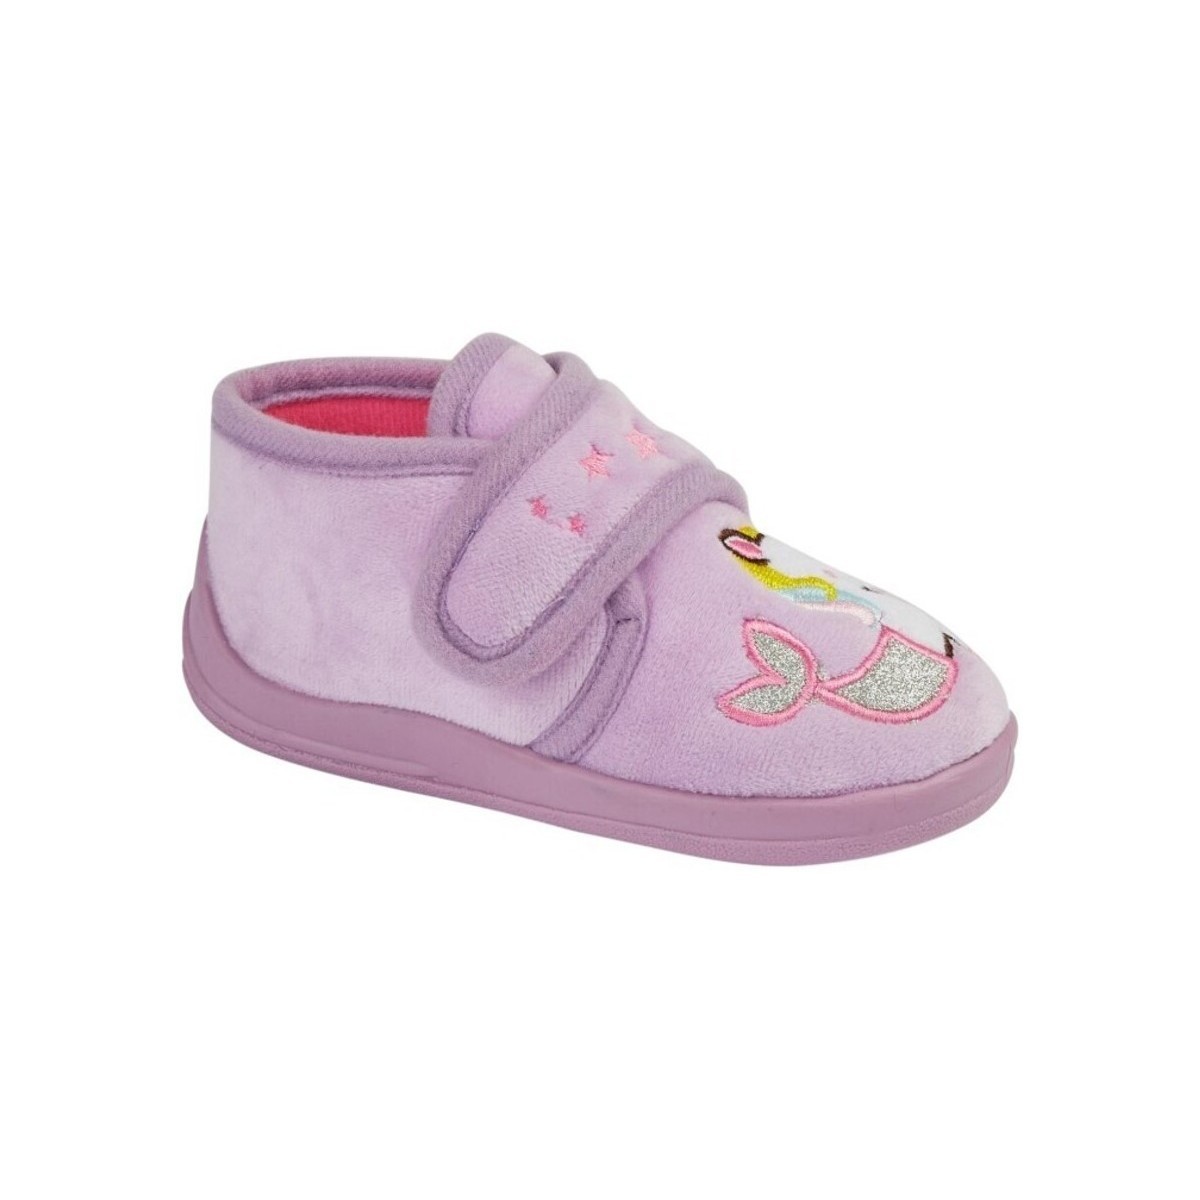 Chaussures Fille Chaussons Sleepers  Violet